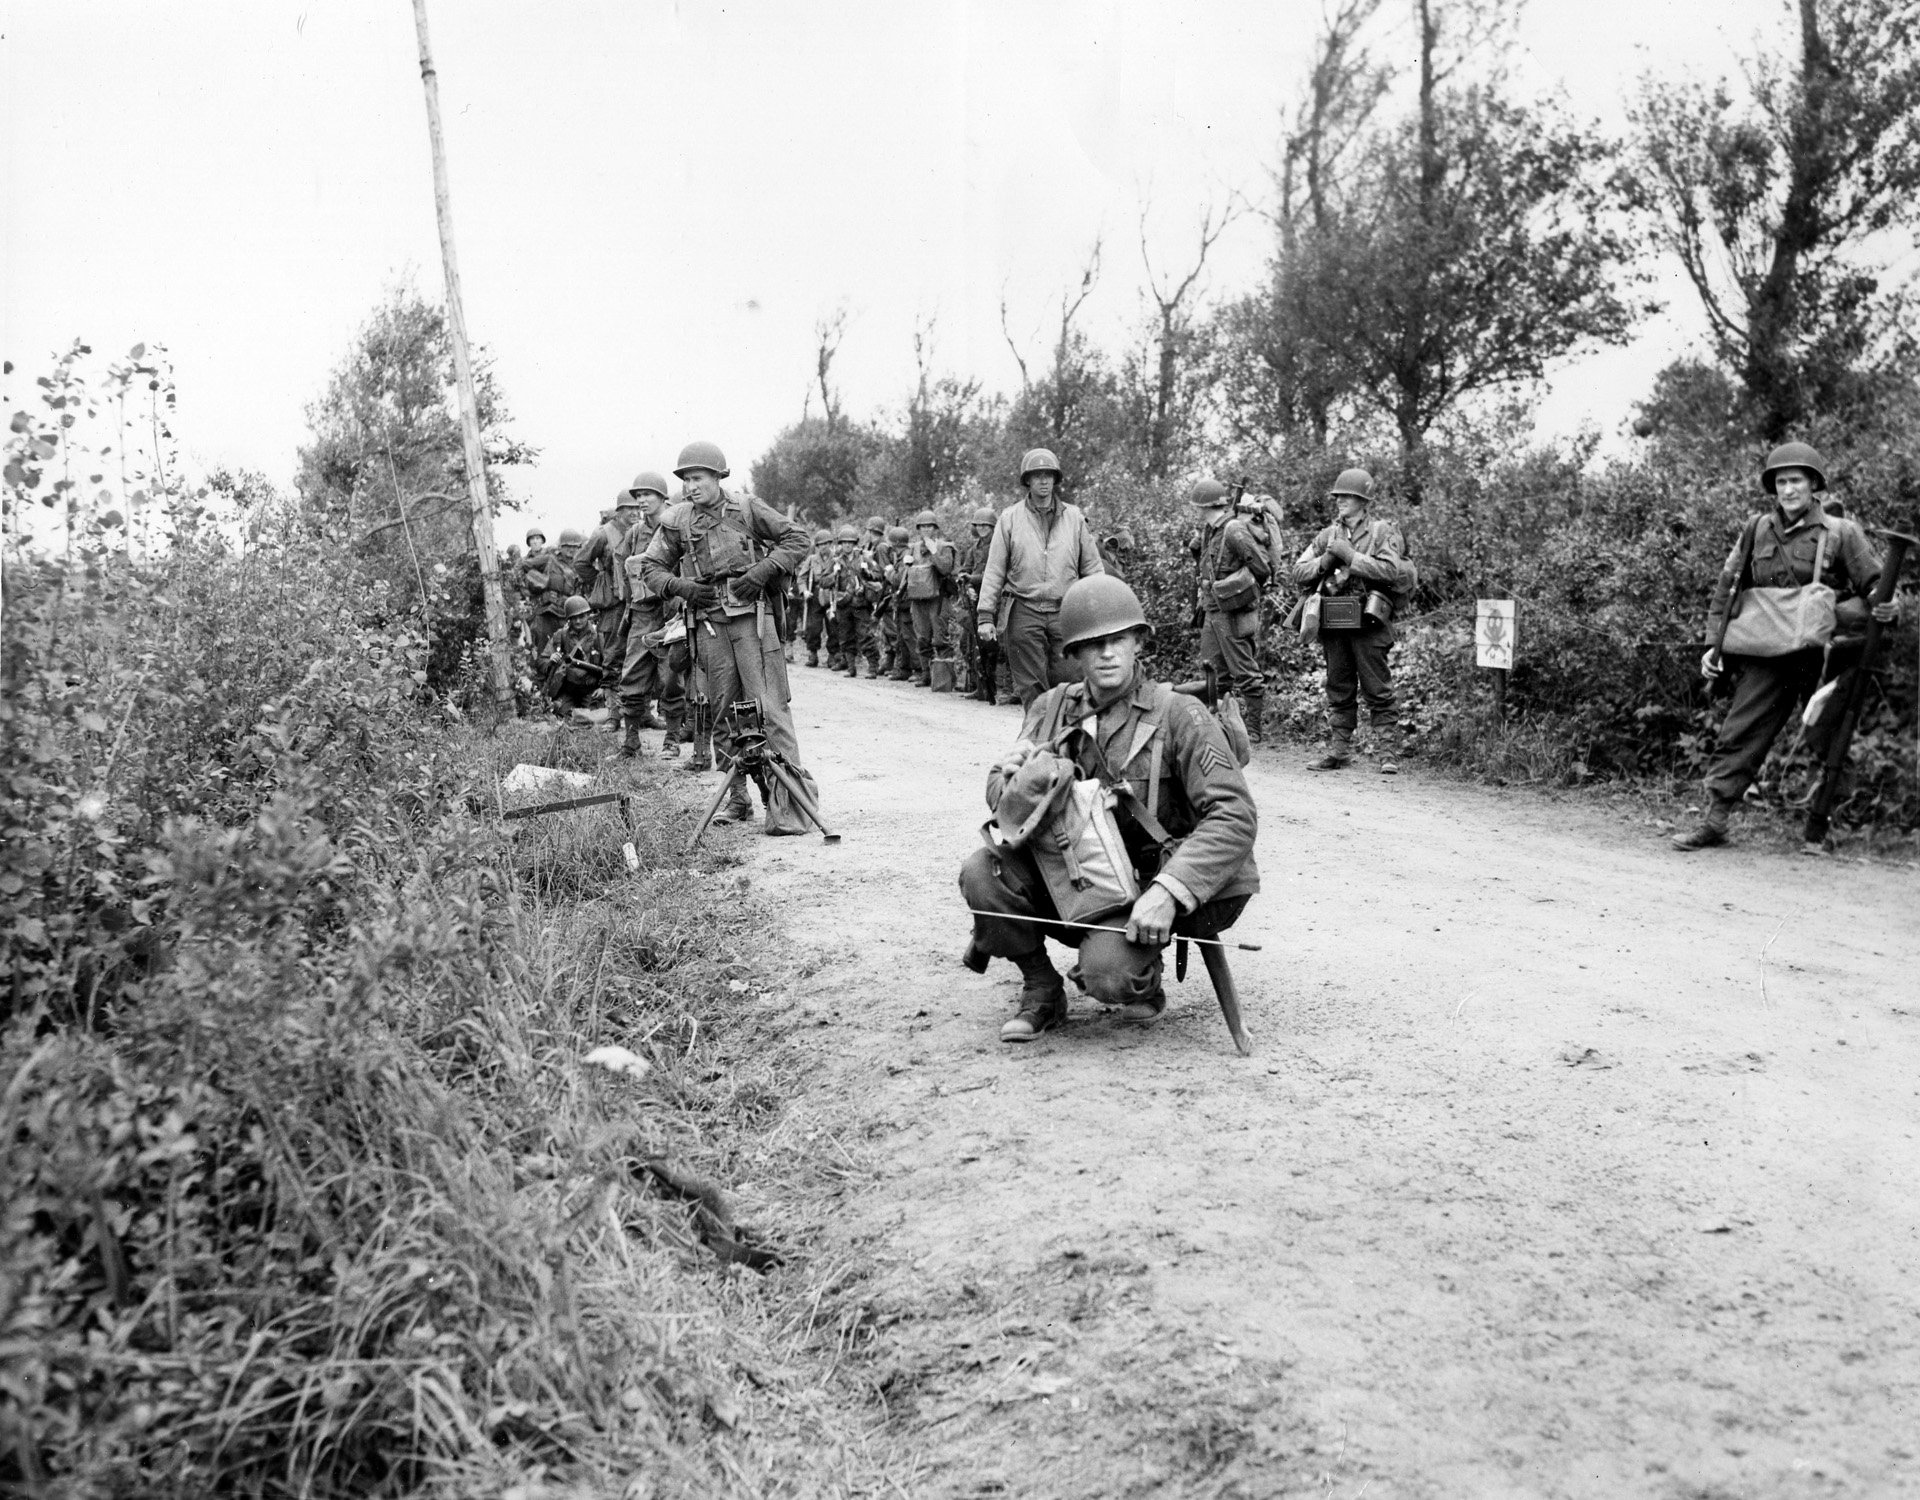 Soldiers of the U.S. 90th Infantry Division move inland in Normandy on June 6, 1944. The men of the “Tough ‘Ombres” were believed to have performed poorly in their early combat encounters. However, new leadership hardened the division into a fine fighting formation, as proven at the Battle of Mairy.